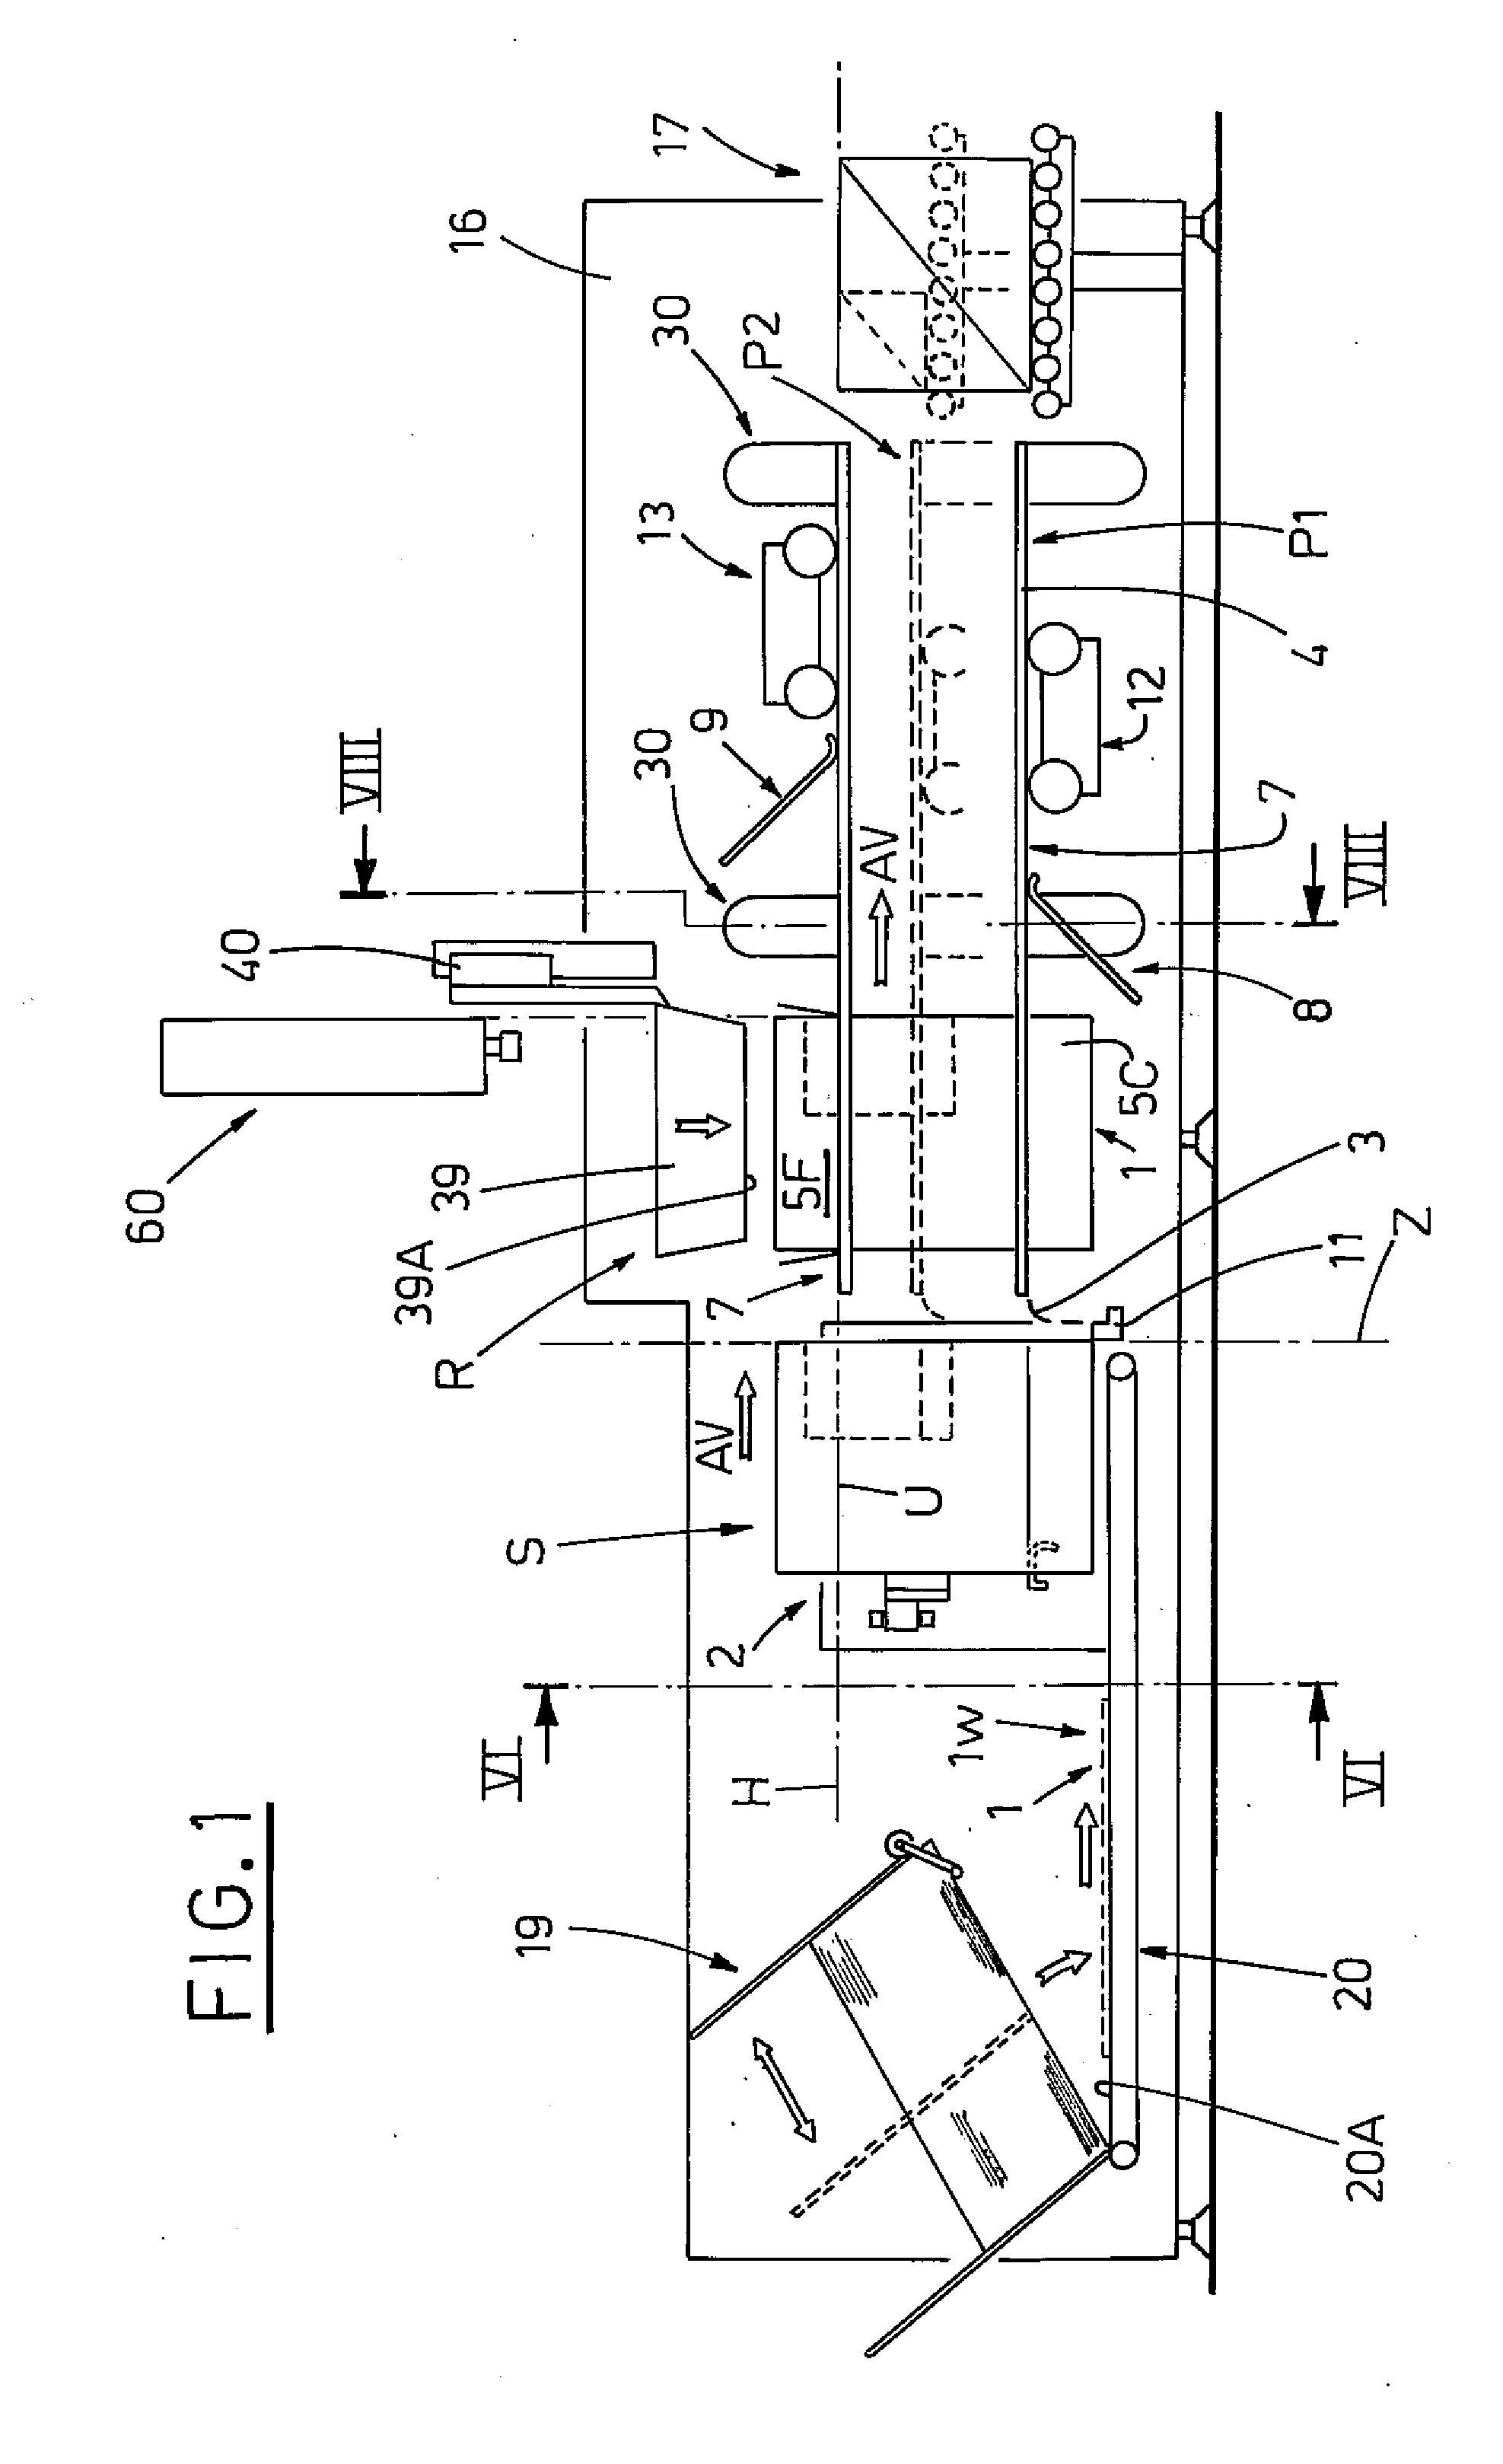 Method for Packaging Articles in Boxes and a Machine Which Carries Out the Method